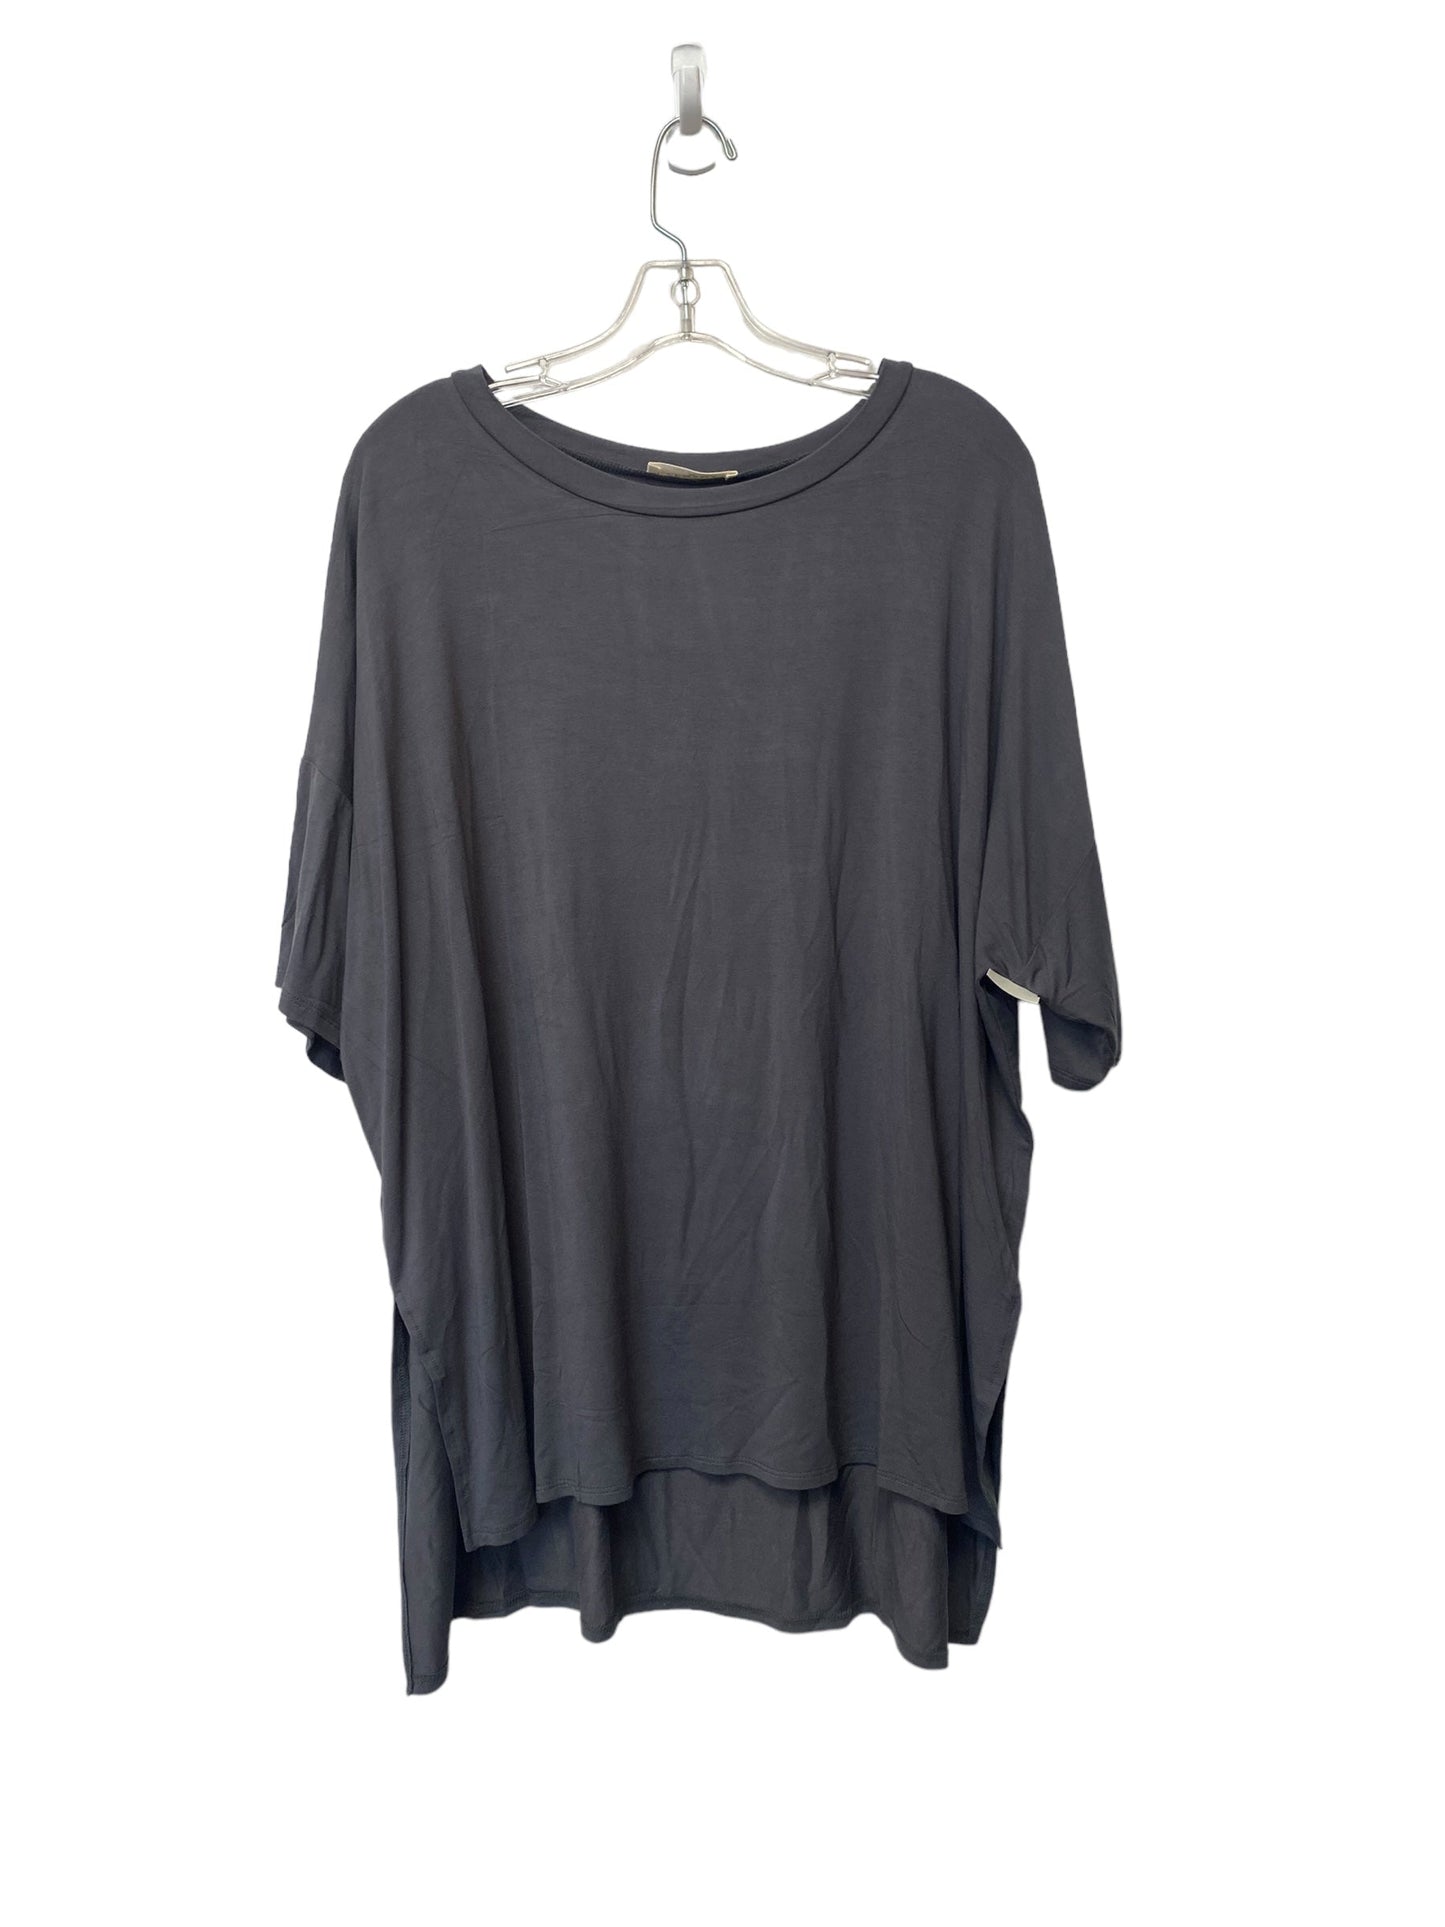 Grey Top Short Sleeve Basic Zenana Outfitters, Size M